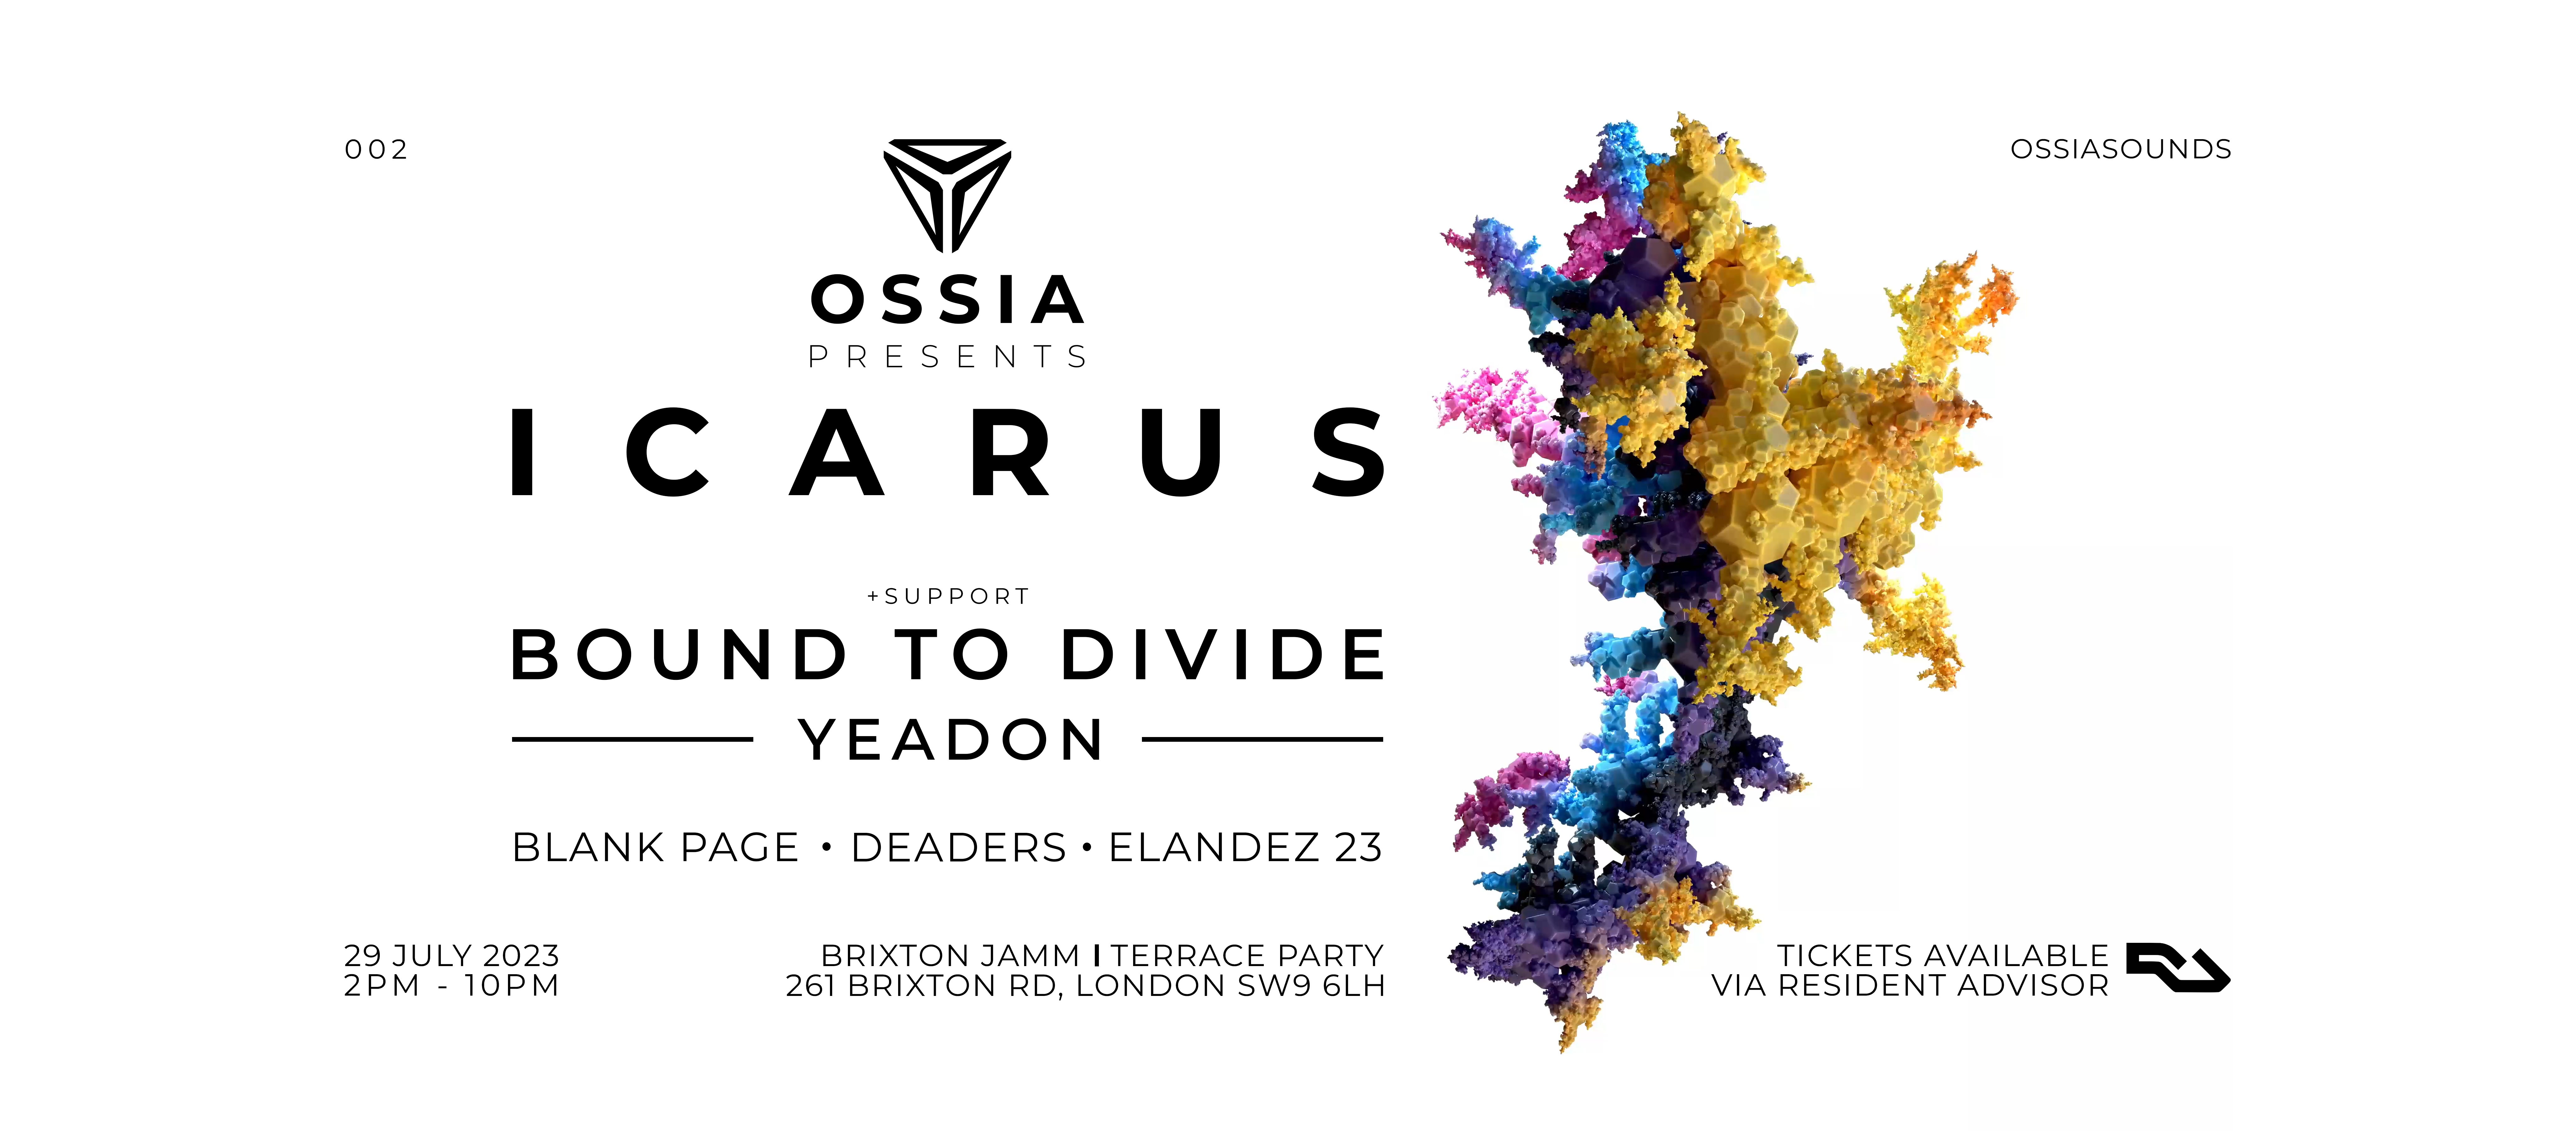 OSSIA presents Icarus, Bound To Divide, Yeadon [DAY PARTY] - Página trasera